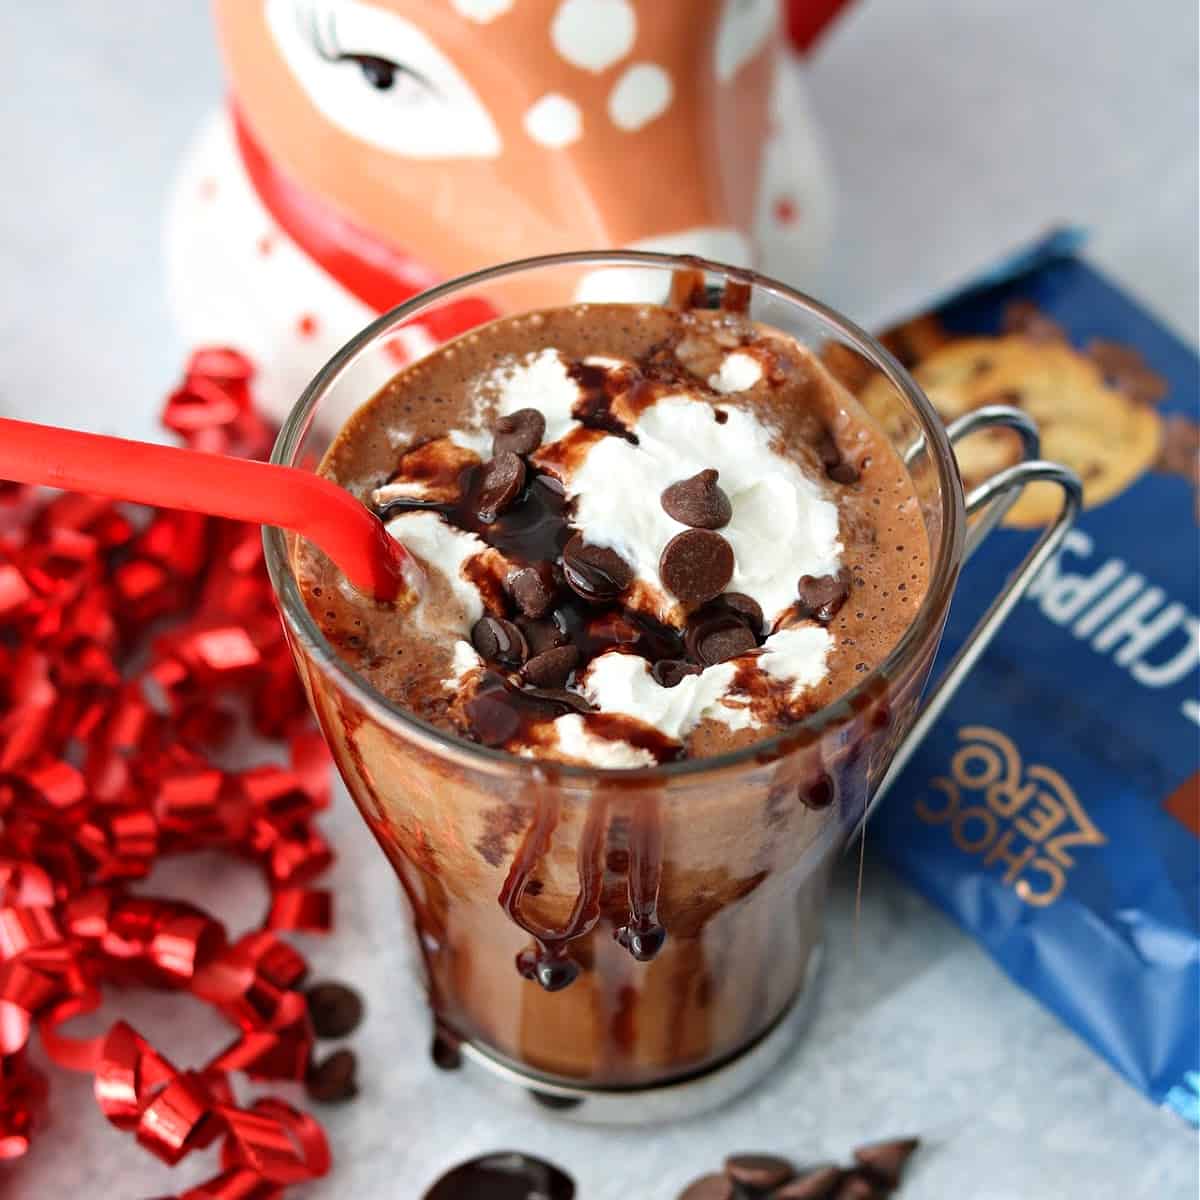 a close up of Peppermint Mocha in a glass mug with Choczero baking chips